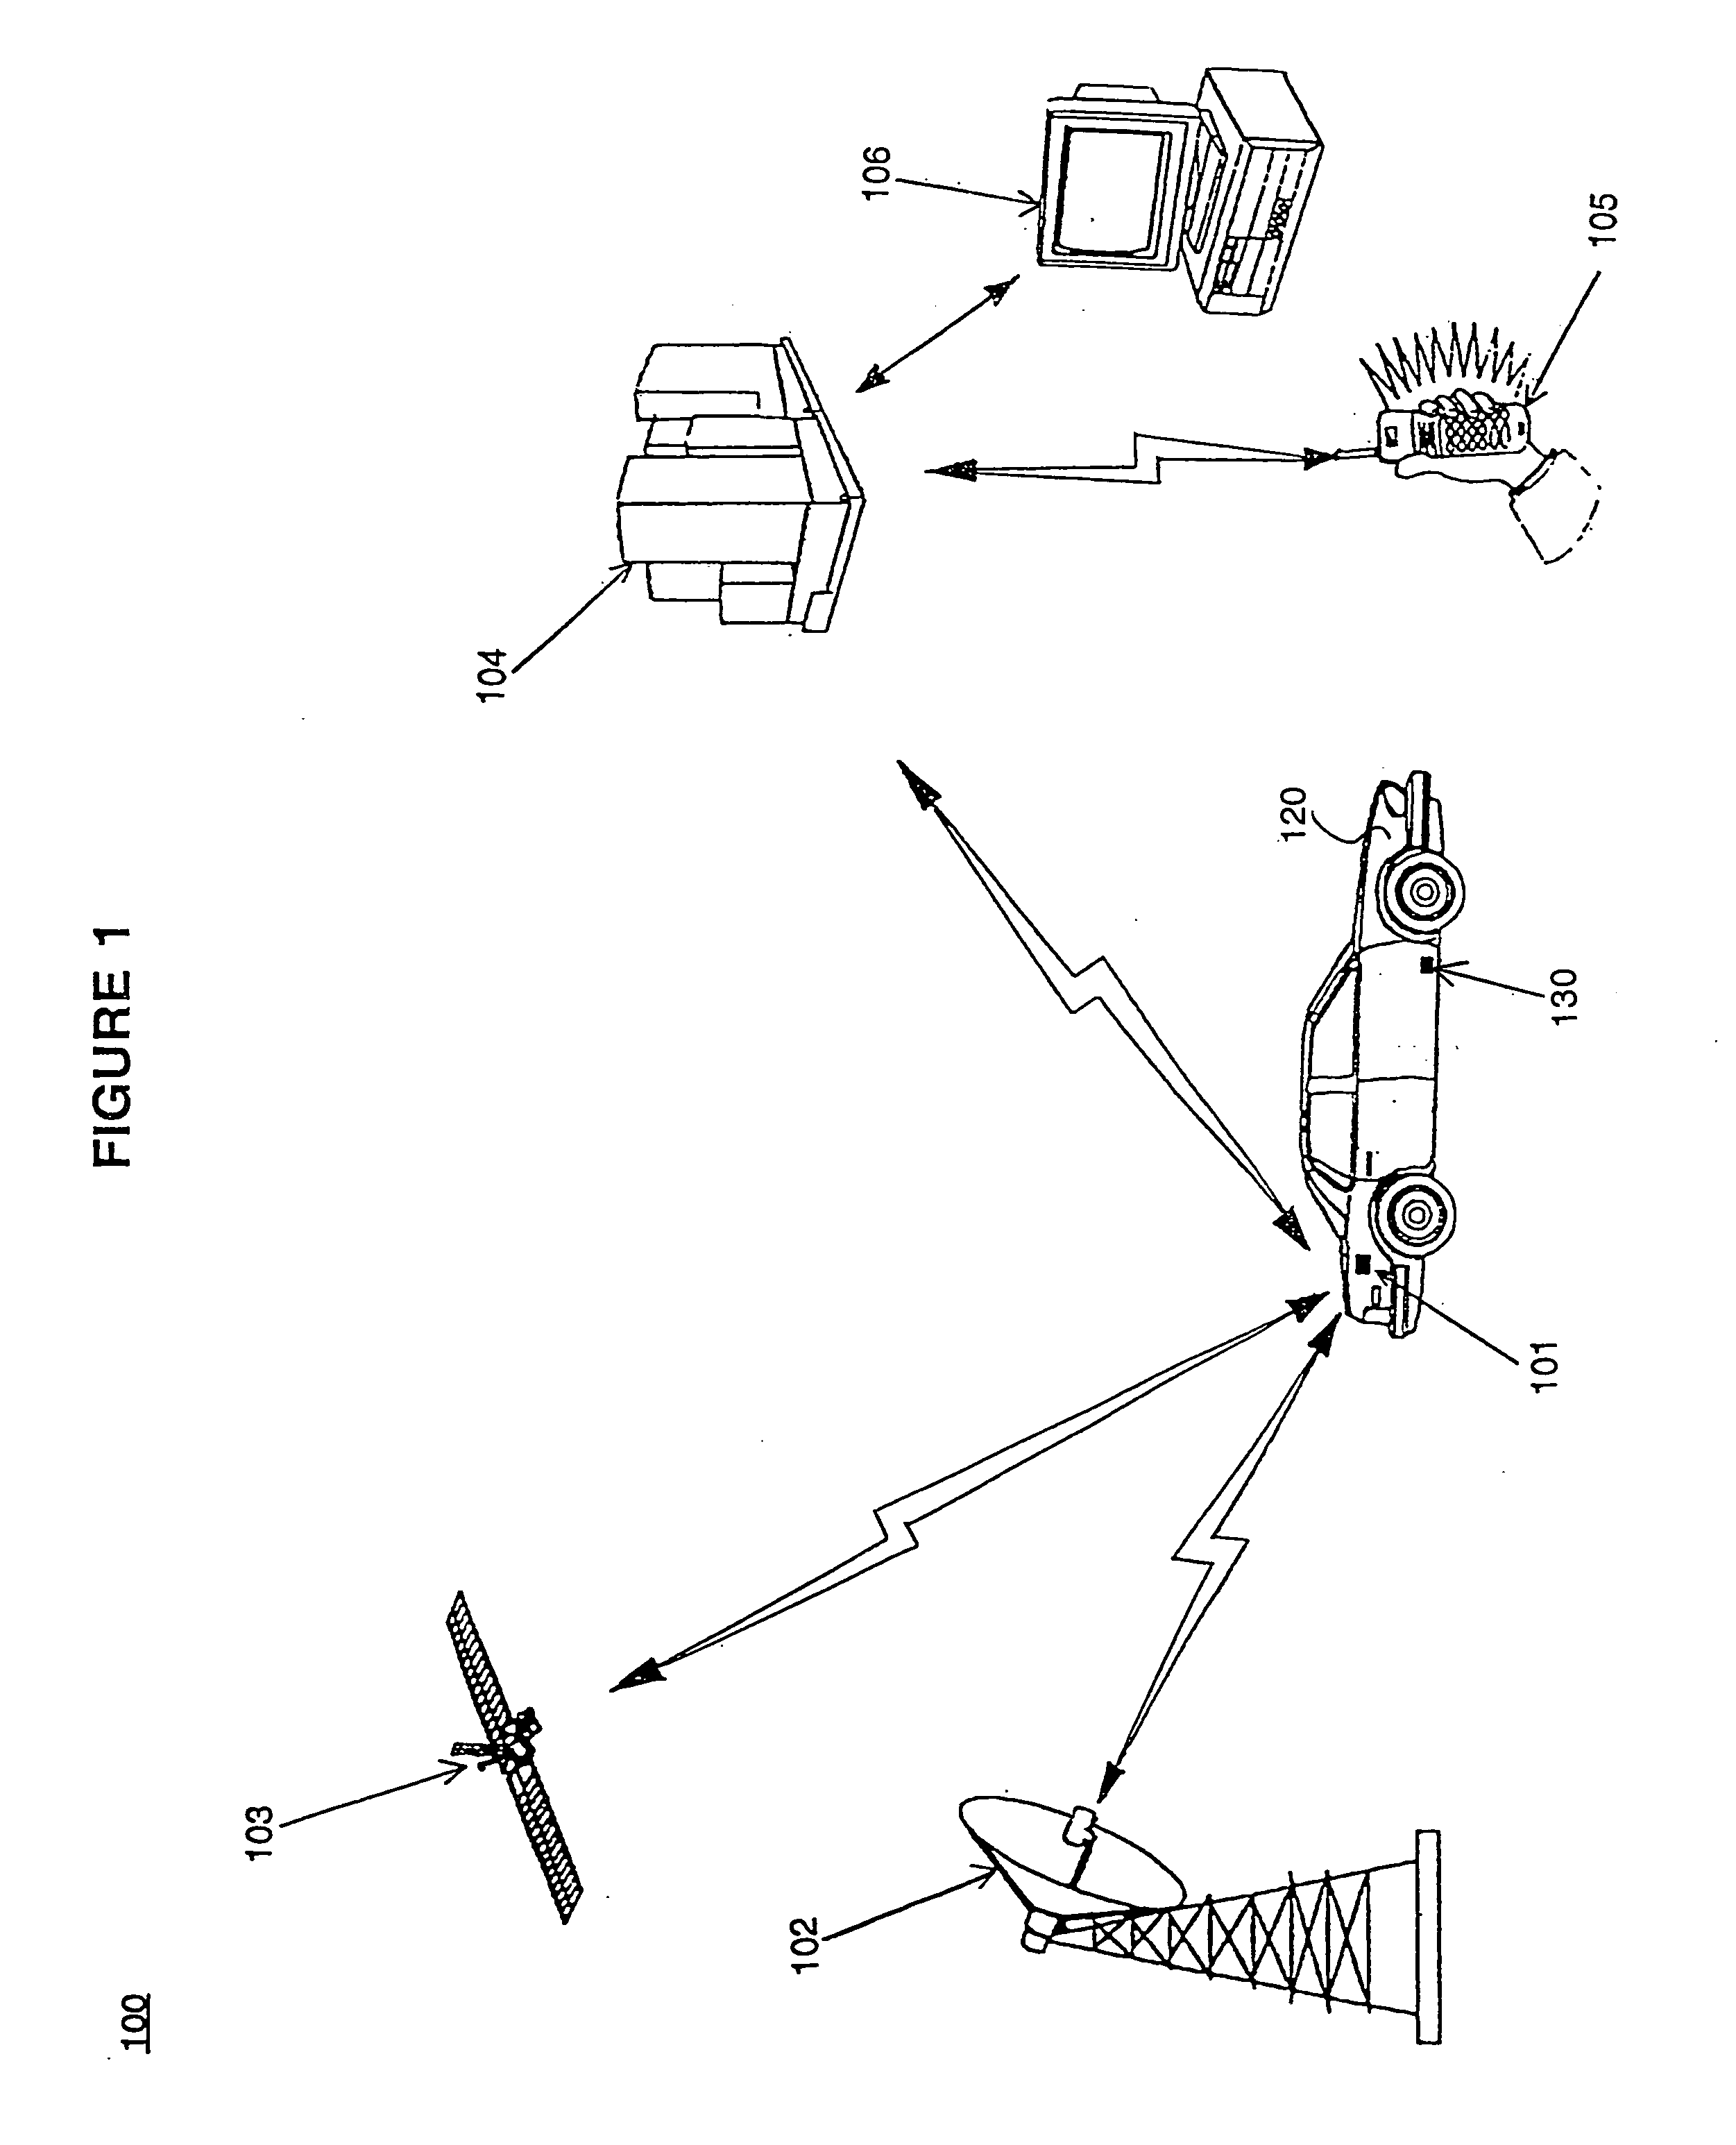 Portable motion-activated position reporting device